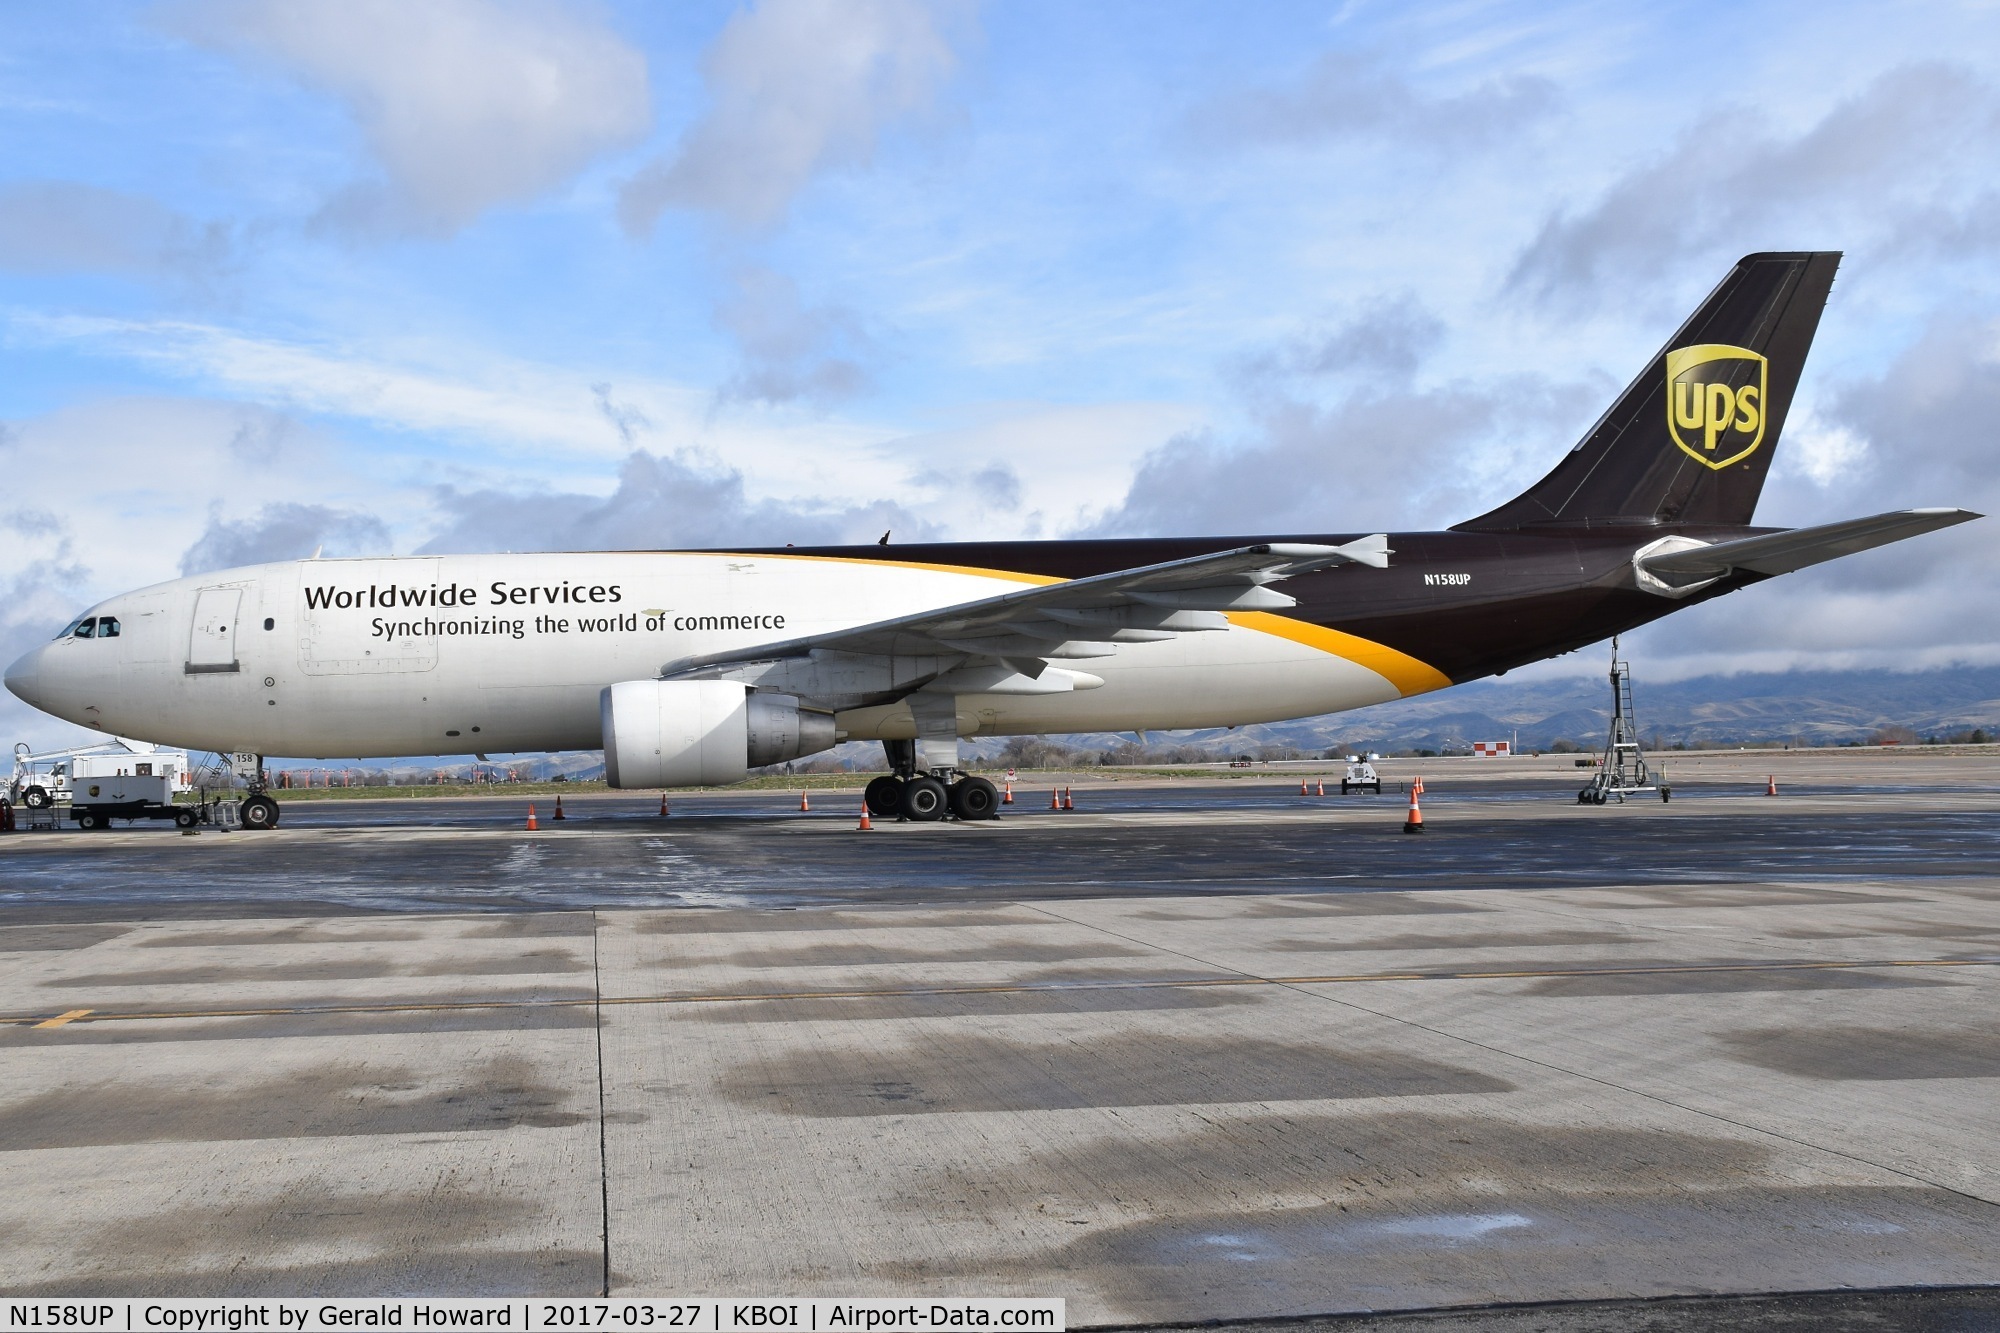 N158UP, 2004 Airbus A300F4-622R C/N 0847, Parked on the UPS ramp.